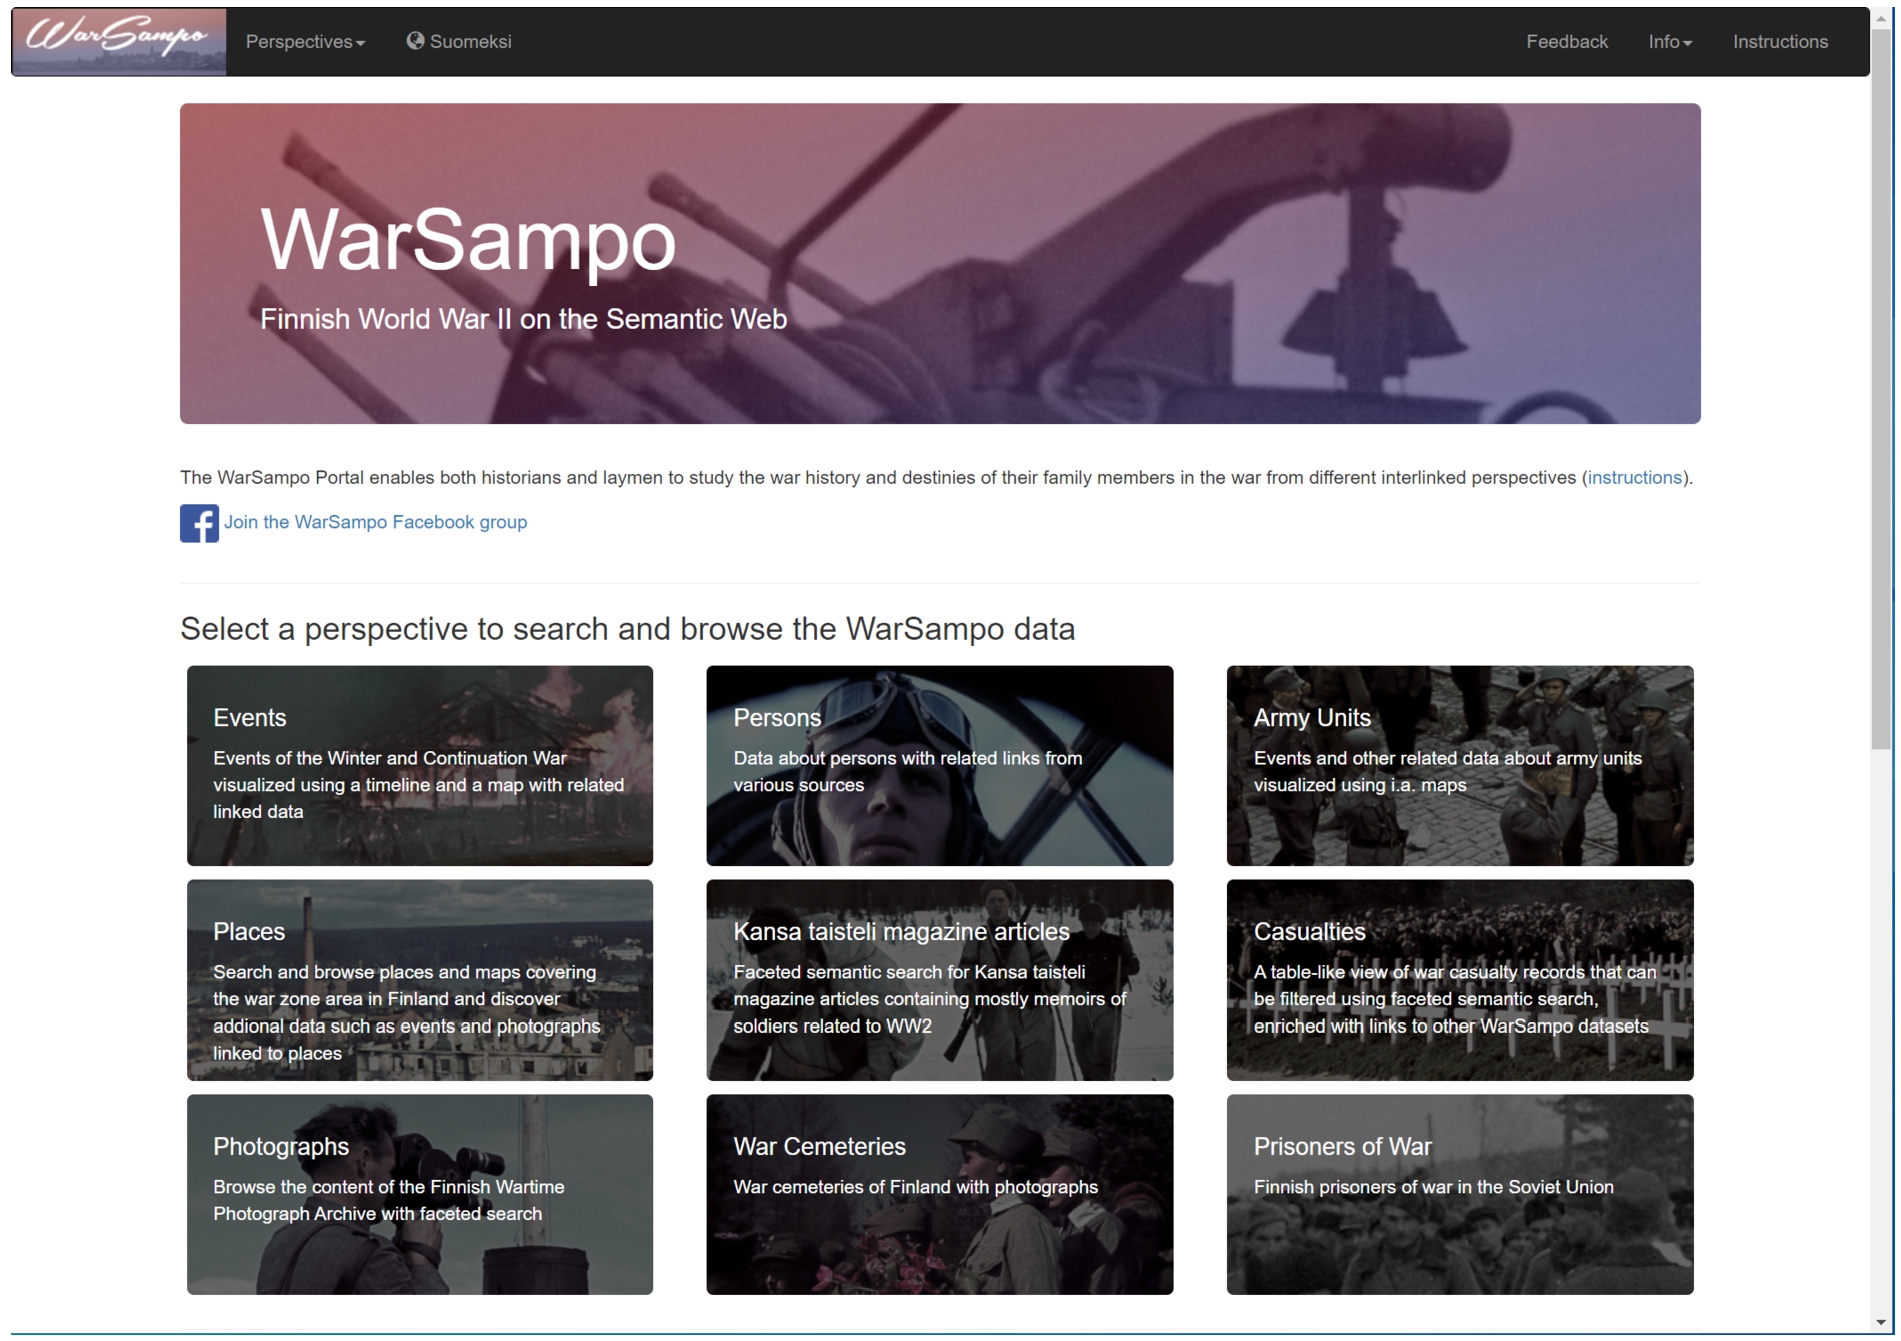 Landing page of WarSampo with nine application perspectives.